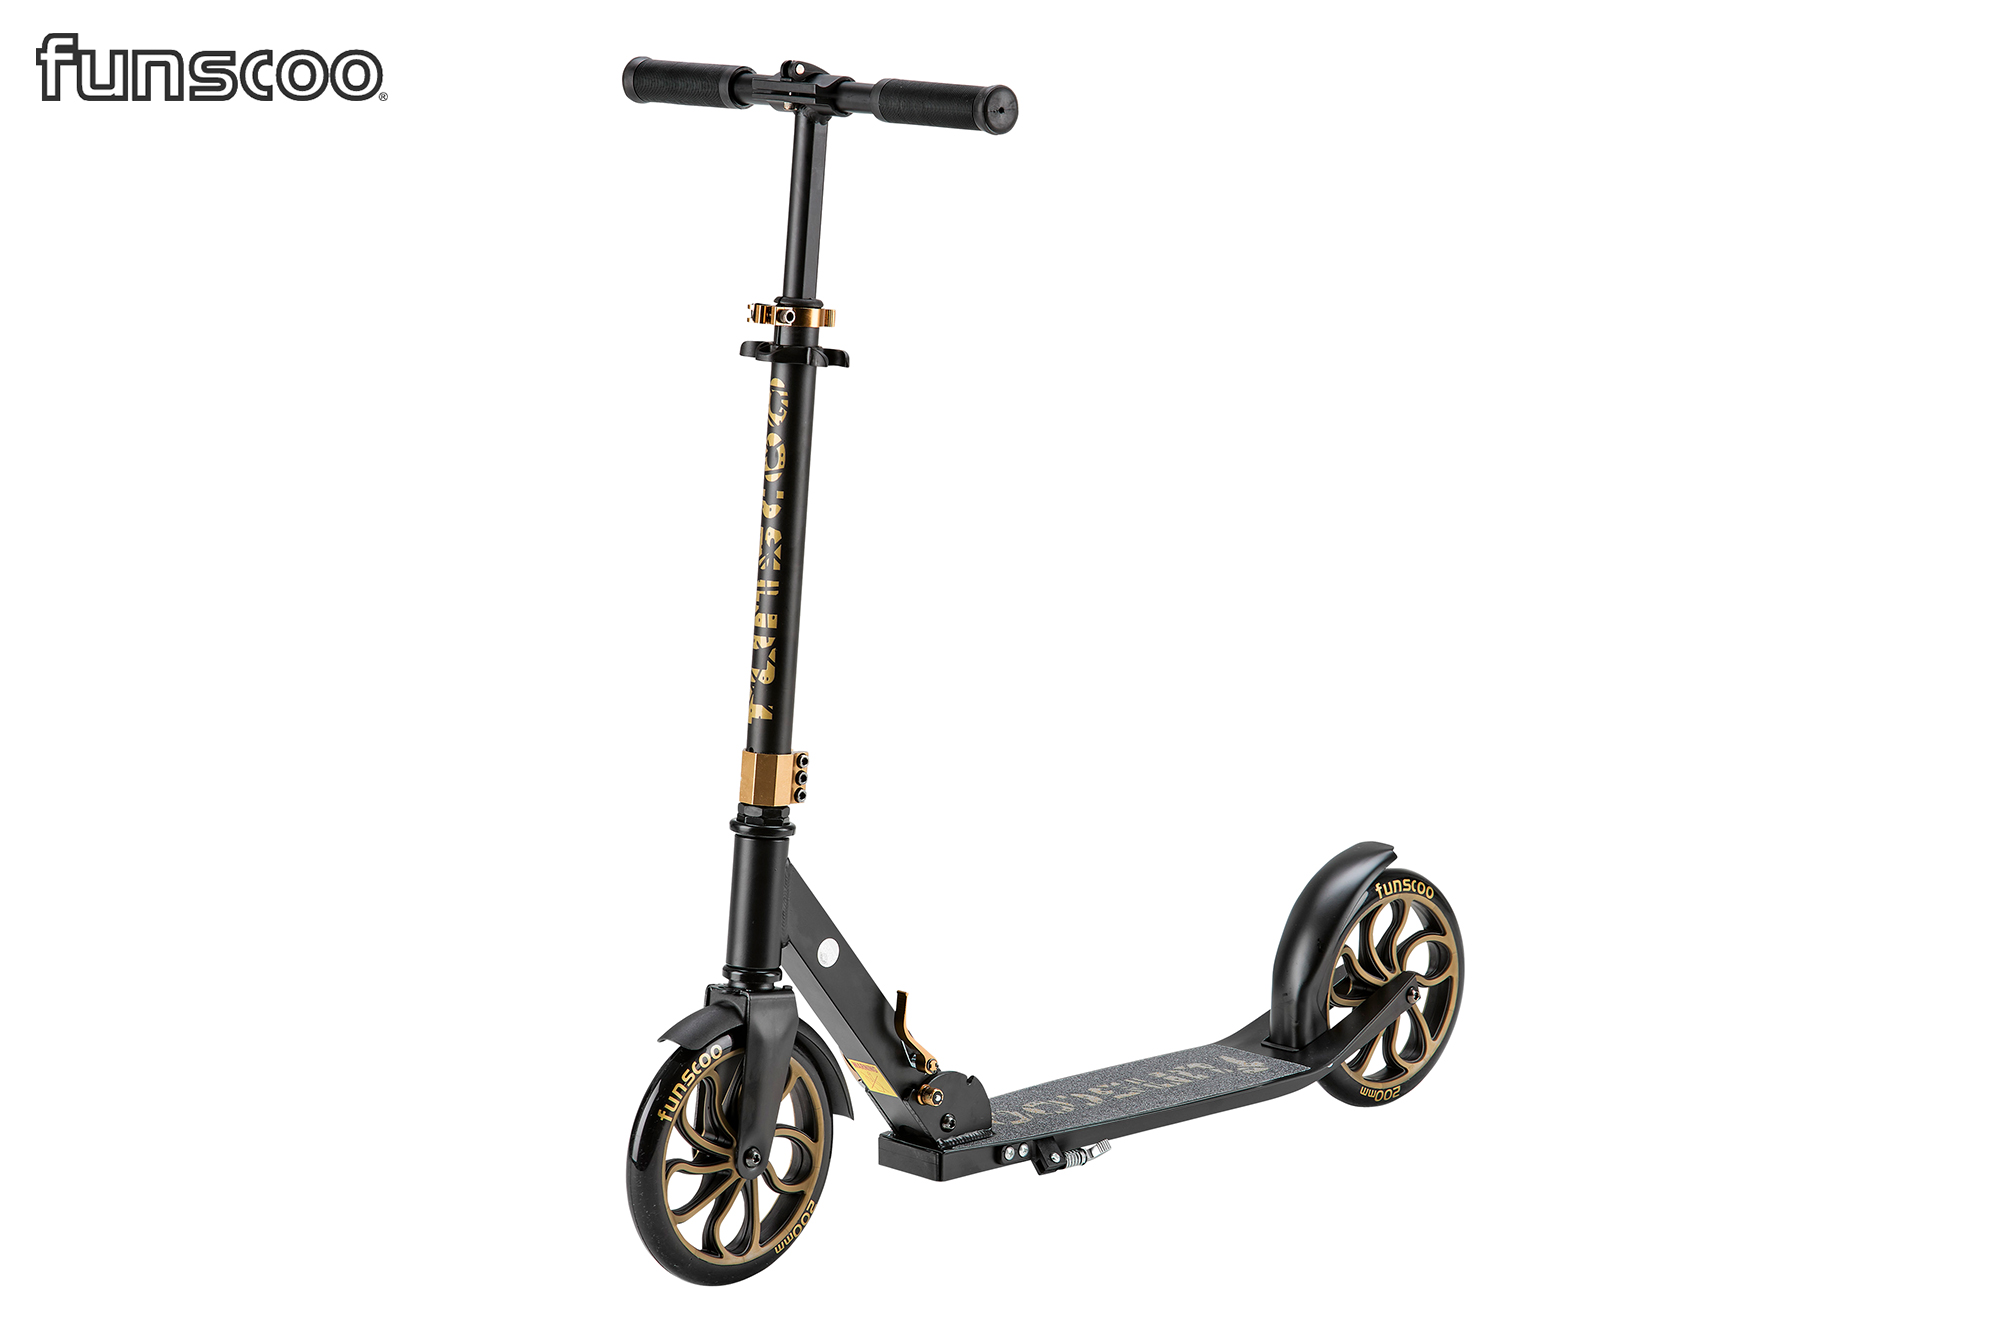 funscoo 200 Scooter - schwarz / gold